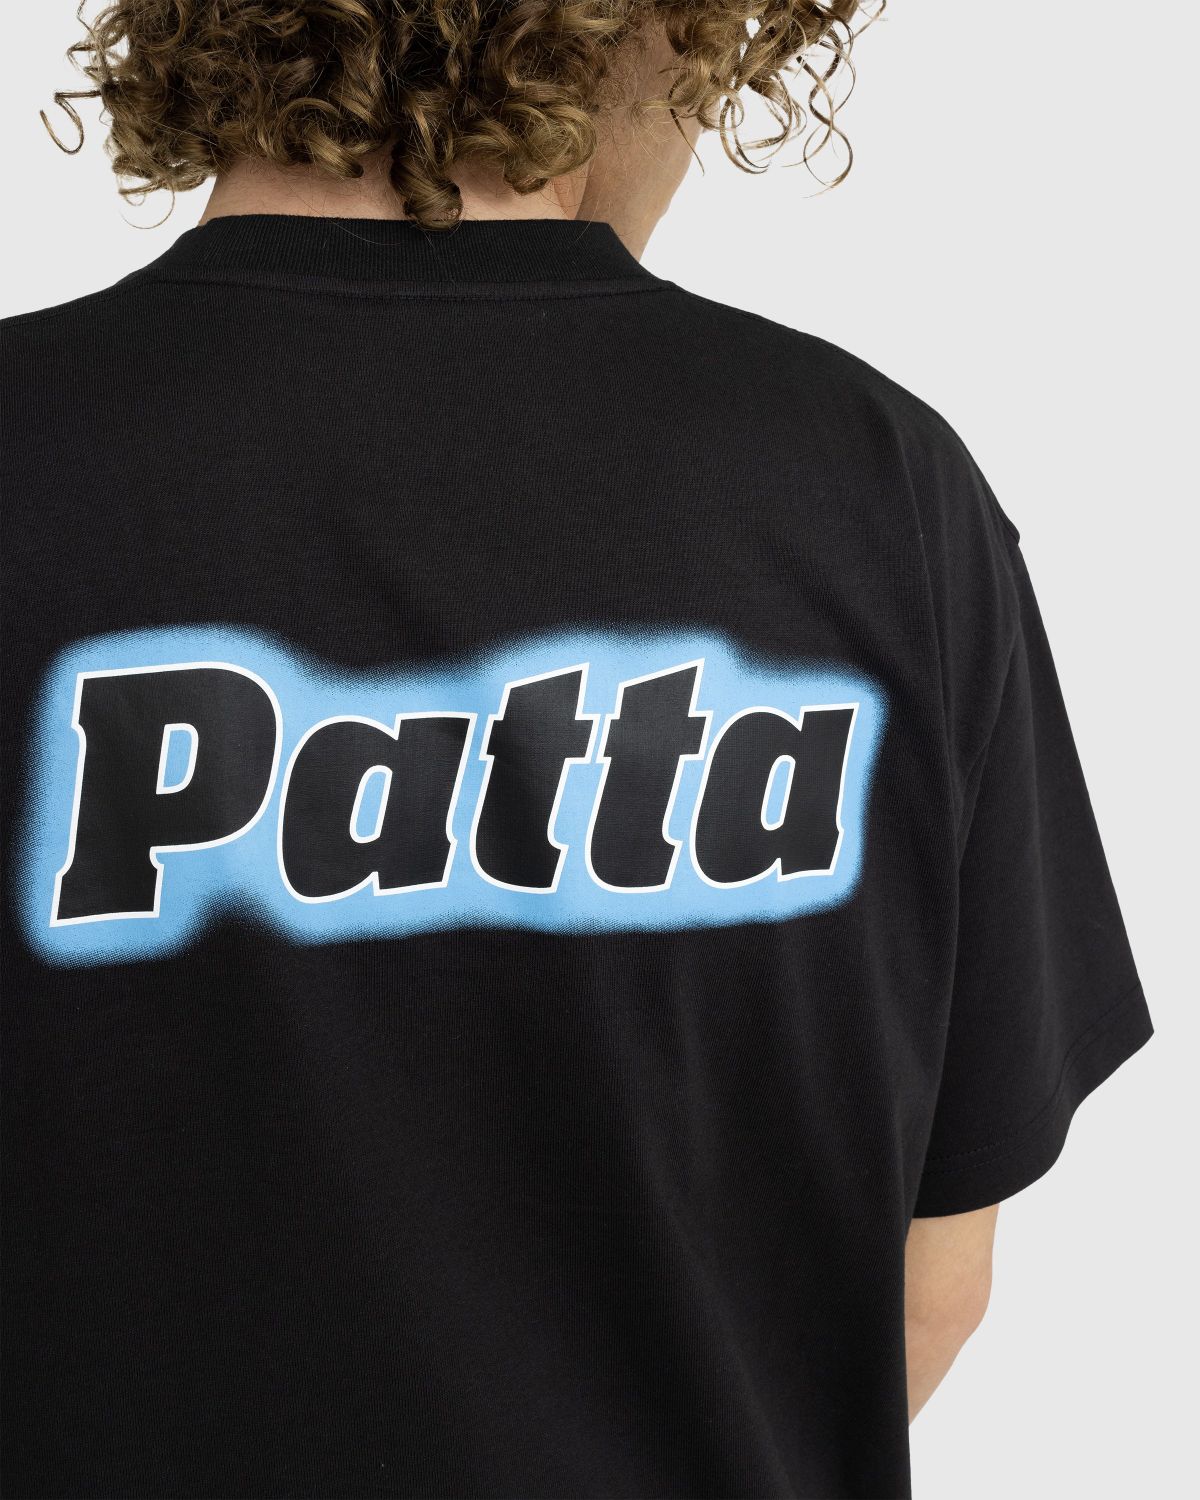 Patta – It Does Matter What You Think T-Shirt Black - Tops - Black - Image 4